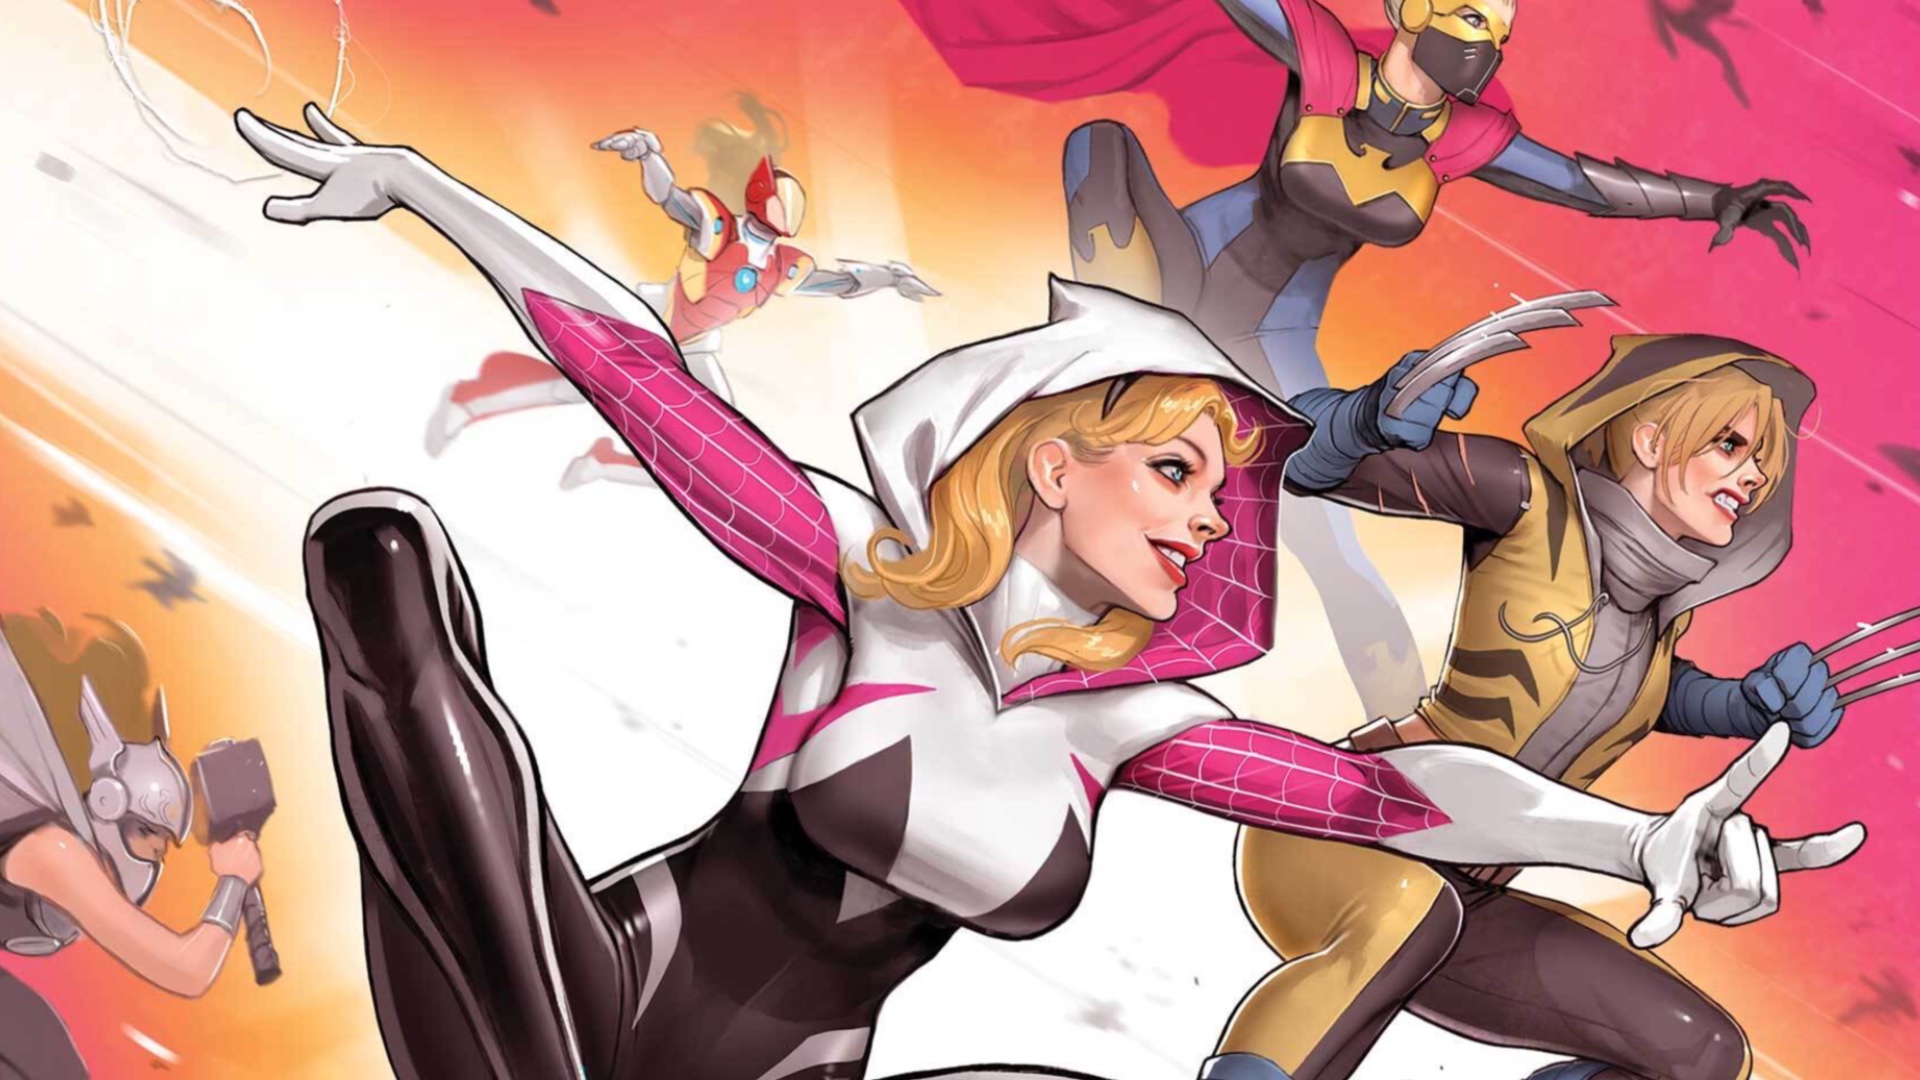 Gwen Stacy Timeline & Order of Spider-Verse Events Explained